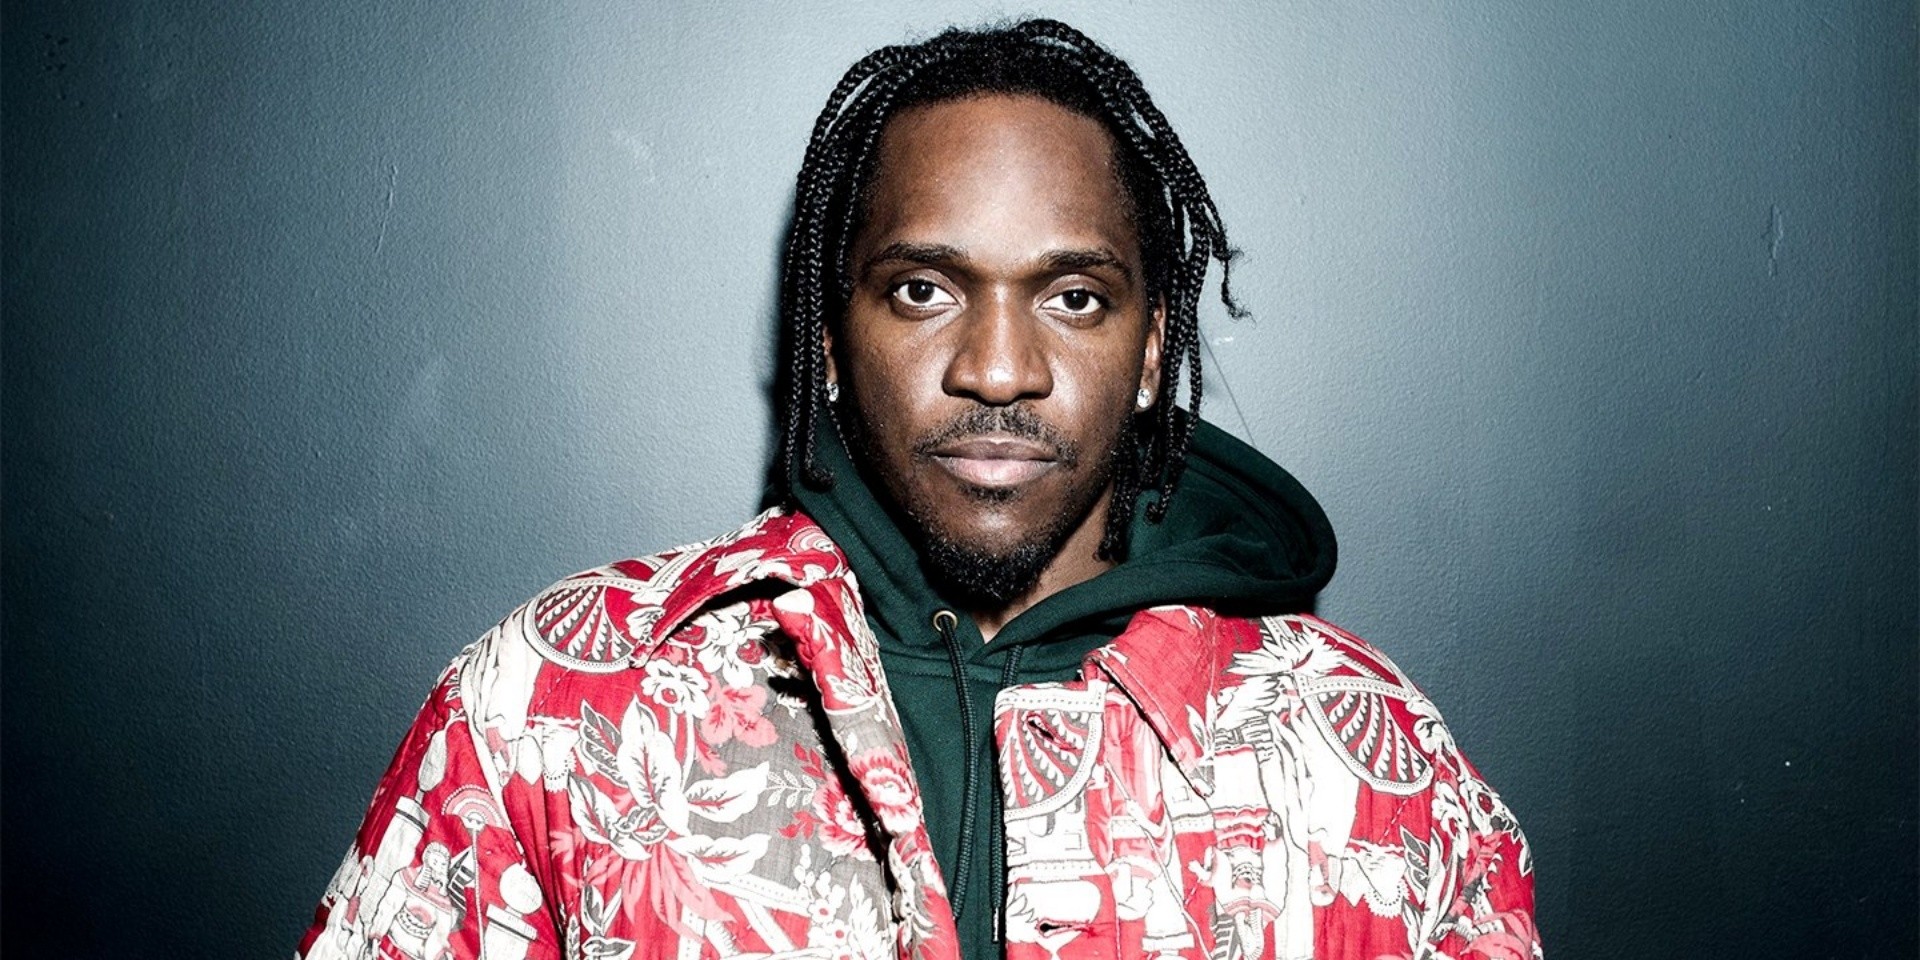 Pusha T and Kash Doll team up on new Kanye West-produced track, 'Sociopath' – listen